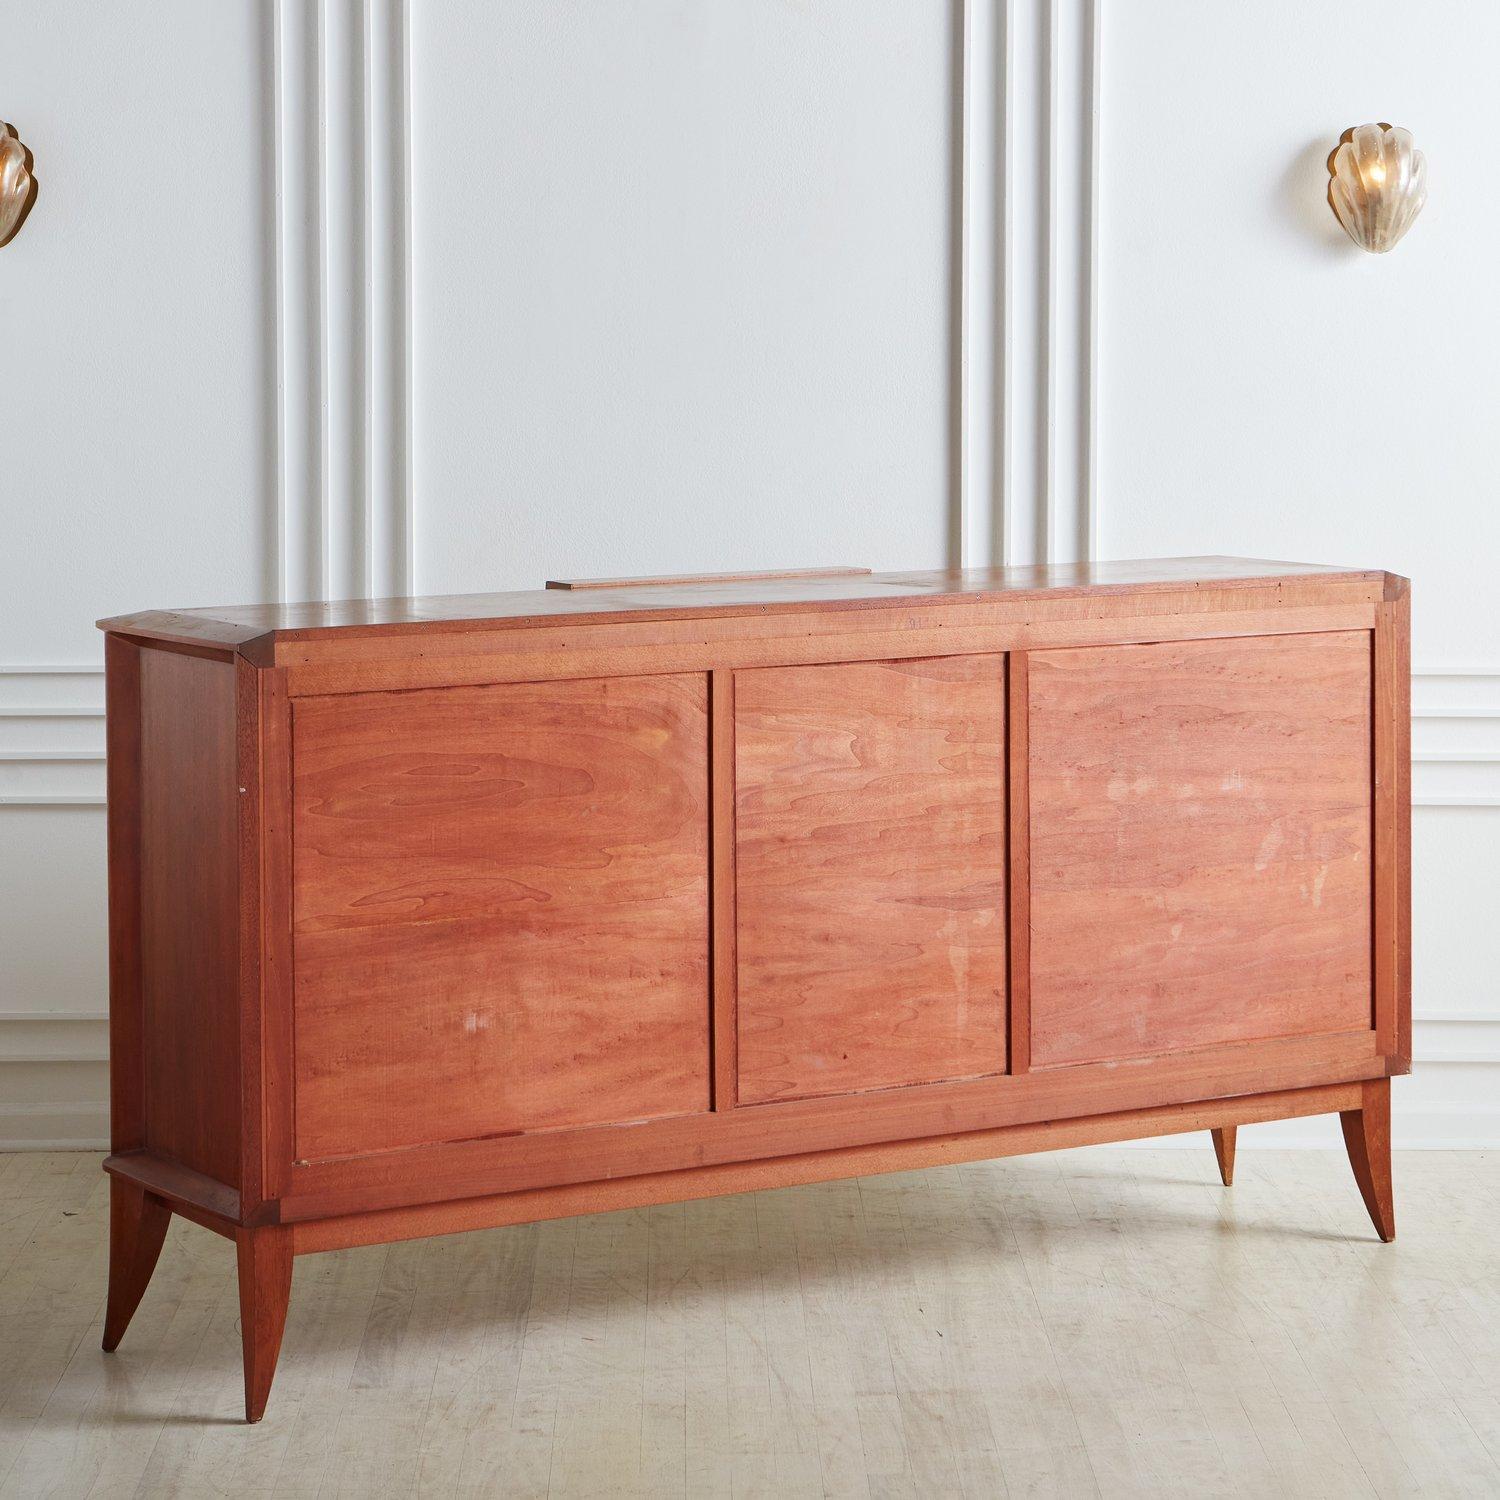 French Bleached Mahogany Credenza With Cherry Wood Drawers, France 20th Century For Sale